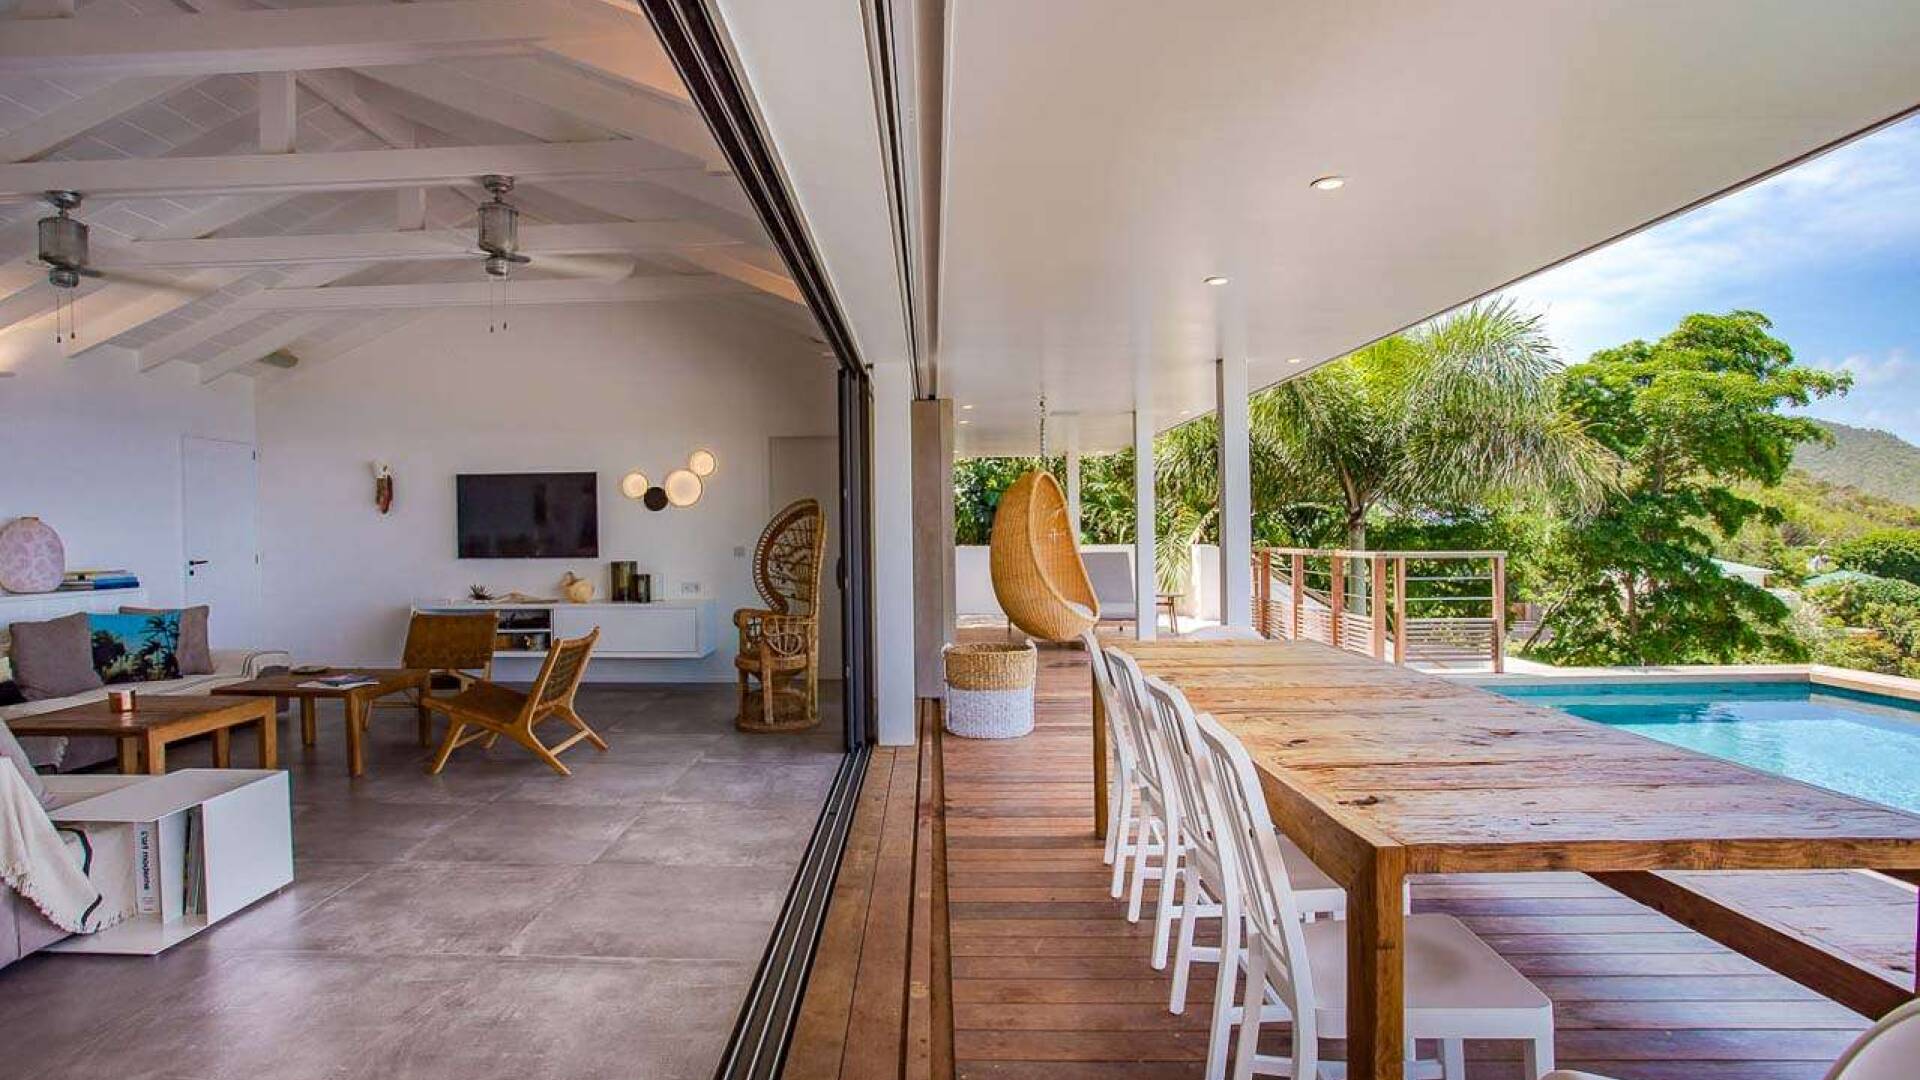 Terrace at WV SUM, Pointe Milou, St. Barthelemy